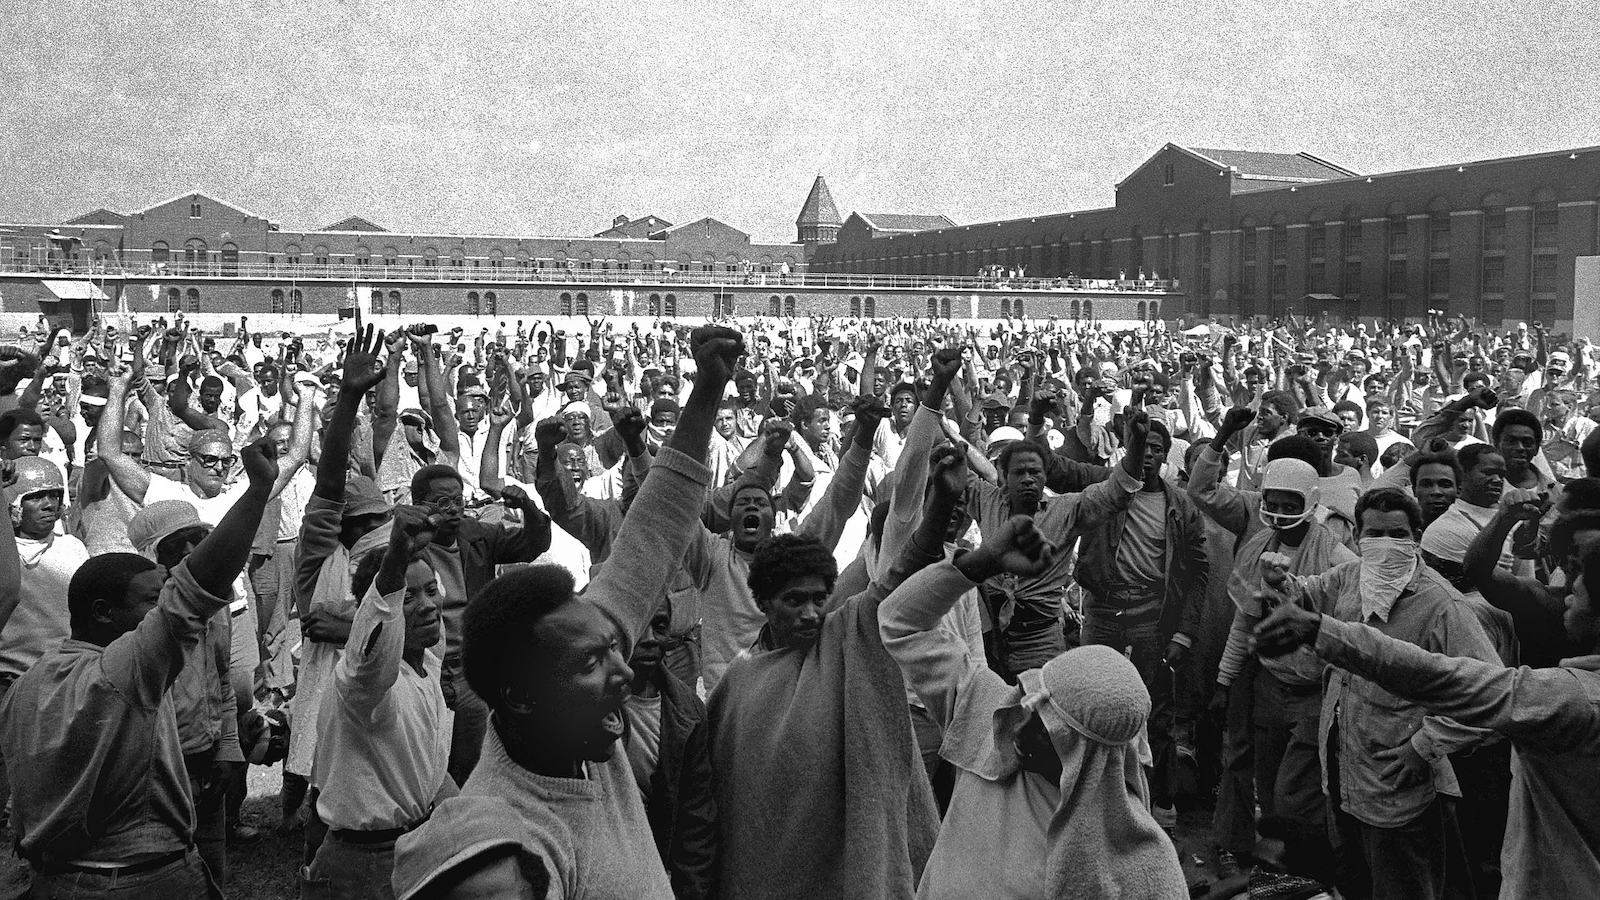 This Sept. 10, 1971 file photo shows inmates of Attica State Prison as they raise their hands in clenched fist salutes to voice their demands during a negotiating session with New York's prison Commissioner Russell Oswald. The whistleblower who spurred a major state investigation of alleged crimes and cover-ups at Attica prison is still on the case four decades later. Ex-prosecutor Malcolm Bell, now 82 and retired to the Green Mountains of Vermont, recently filed court papers in support of opening long-sealed investigation volumes.